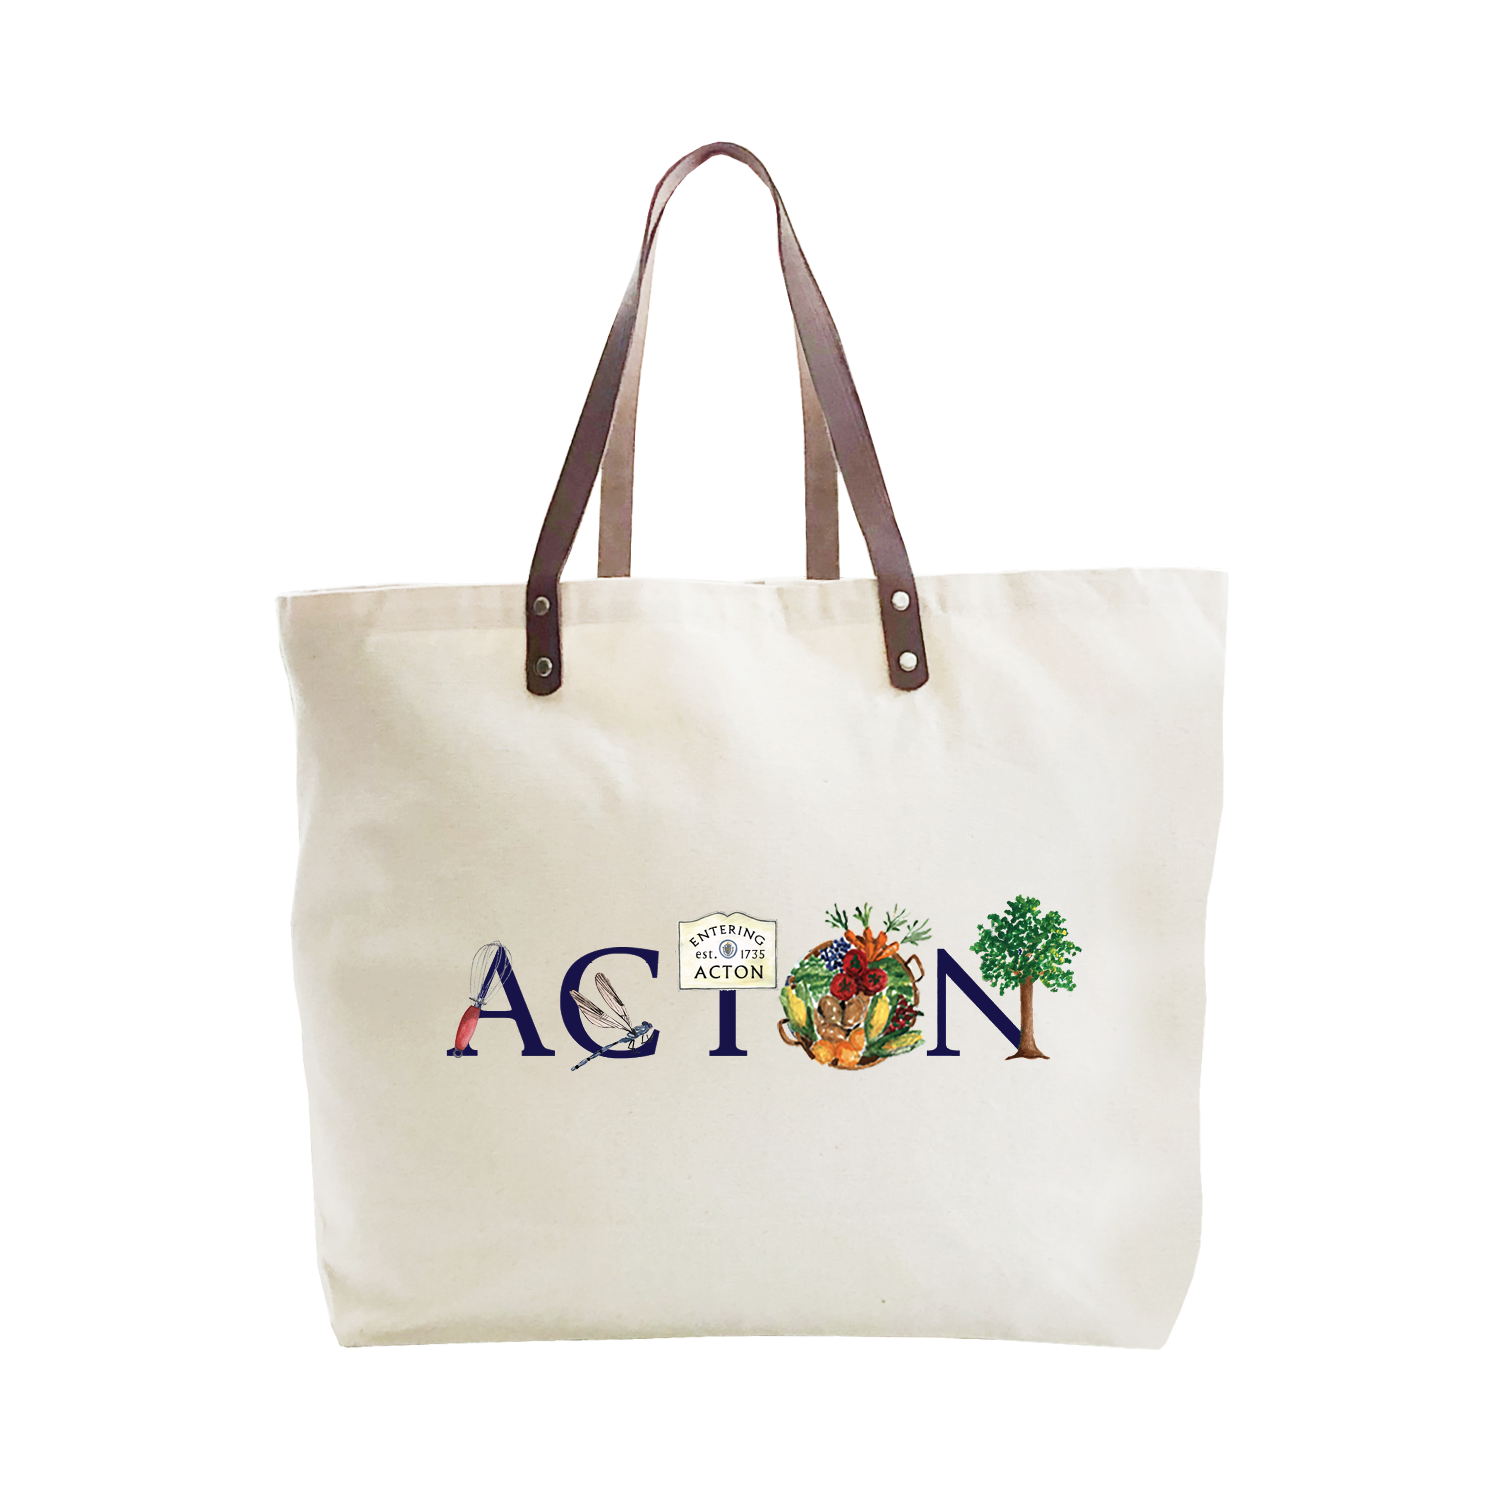 acton large tote